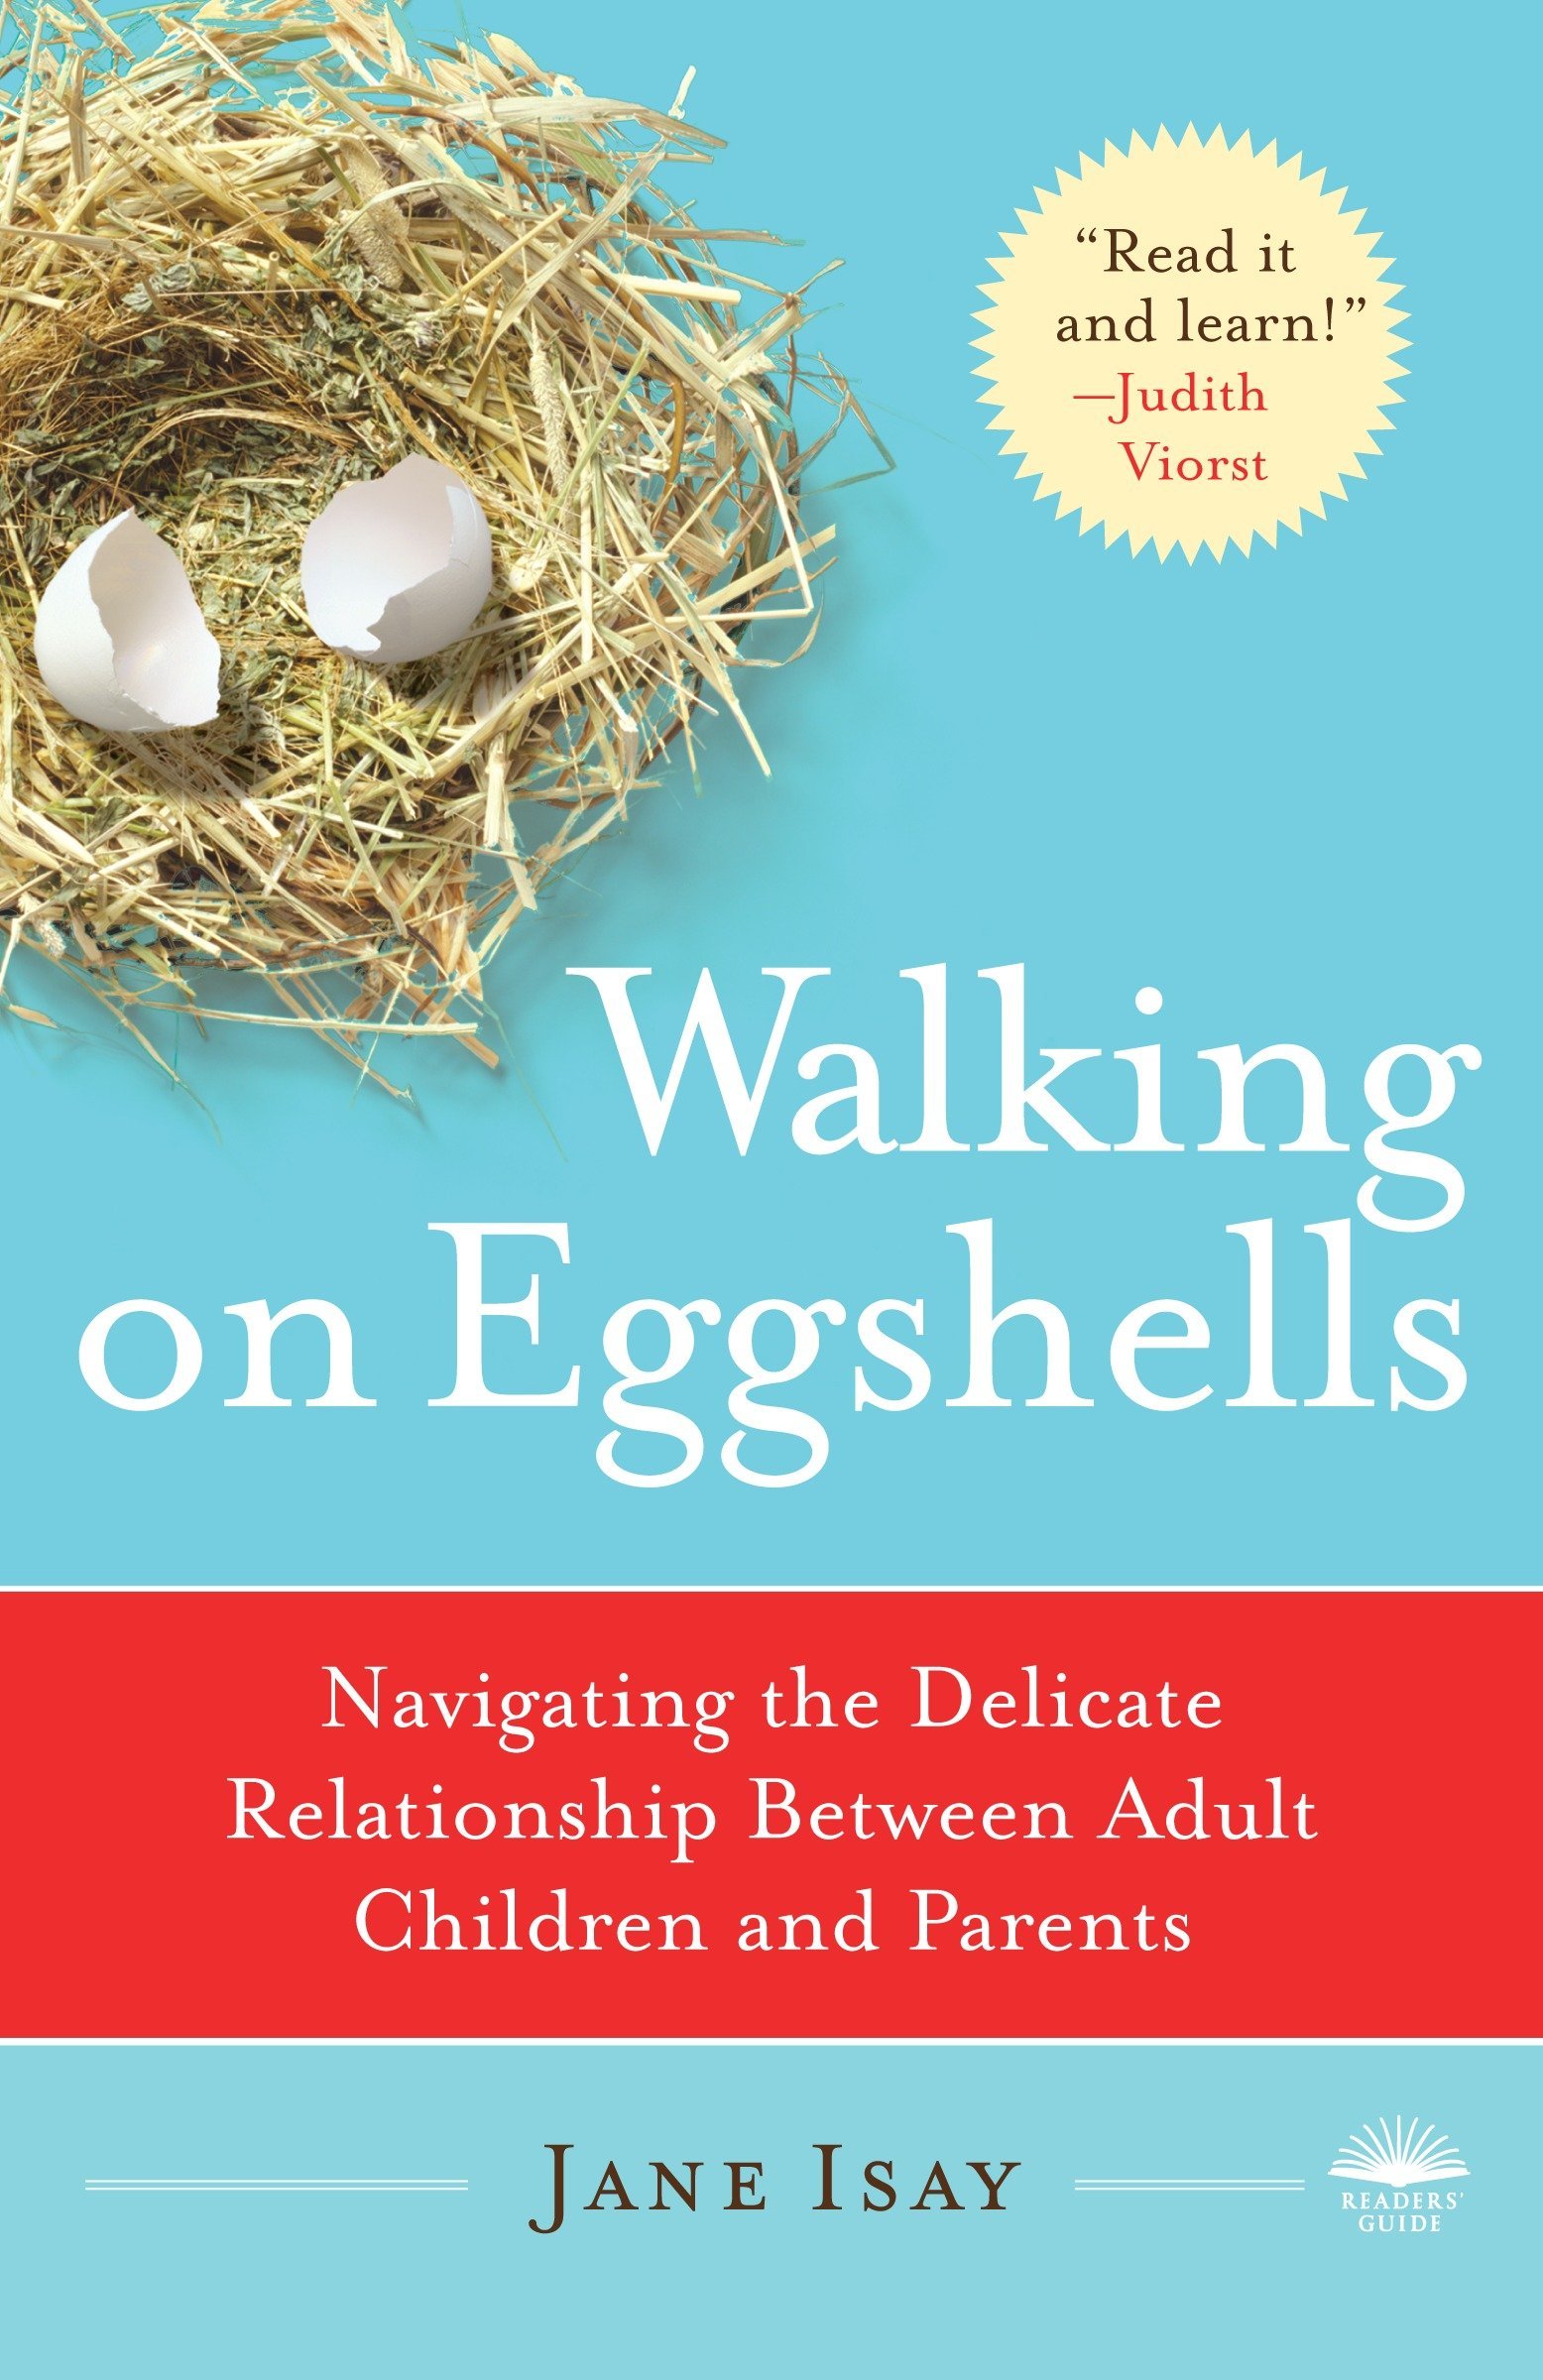 Walking on Eggshells: Navigating the Delicate Relationship Between Adult Children and Their Parents